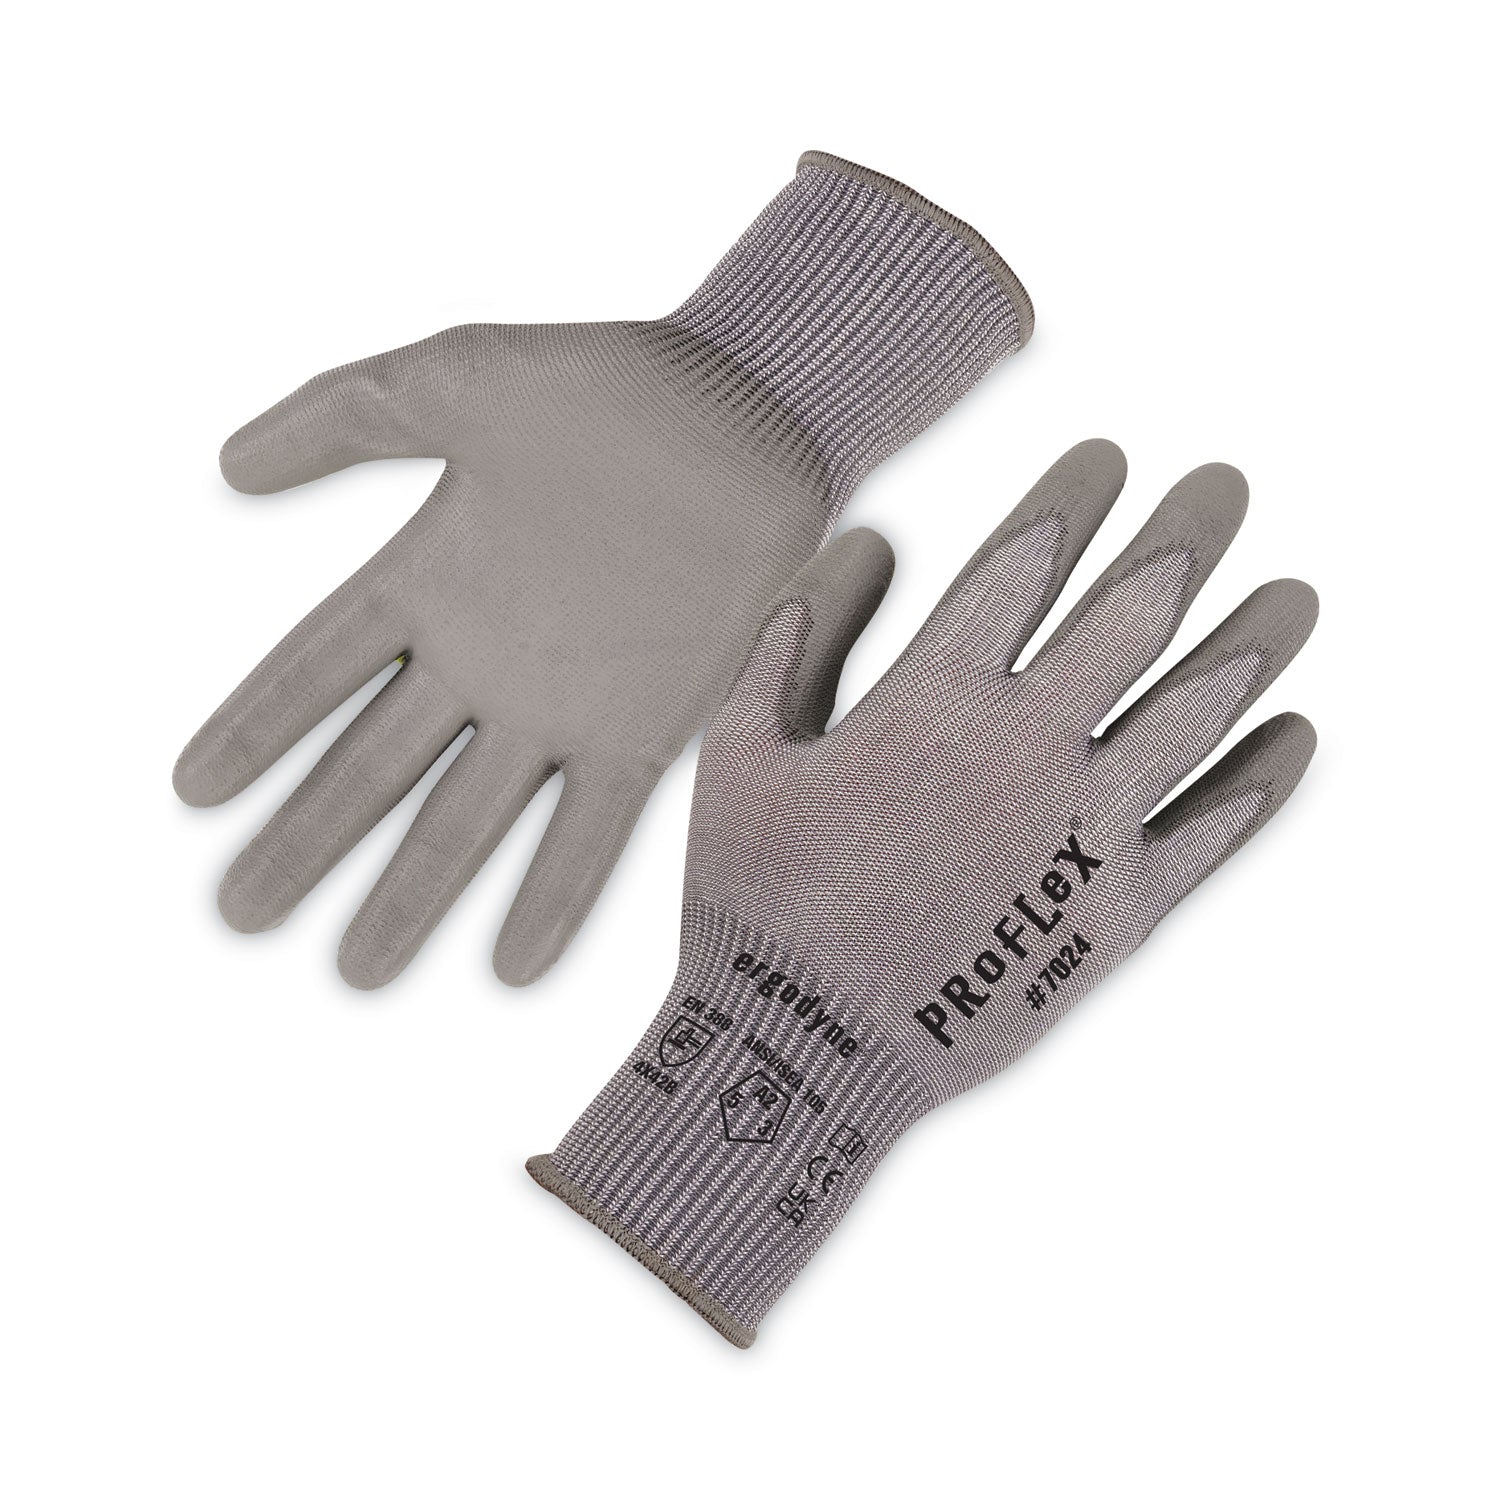 proflex-7024-ansi-a2-pu-coated-cr-gloves-gray-2x-large-pair-ships-in-1-3-business-days_ego10406 - 1